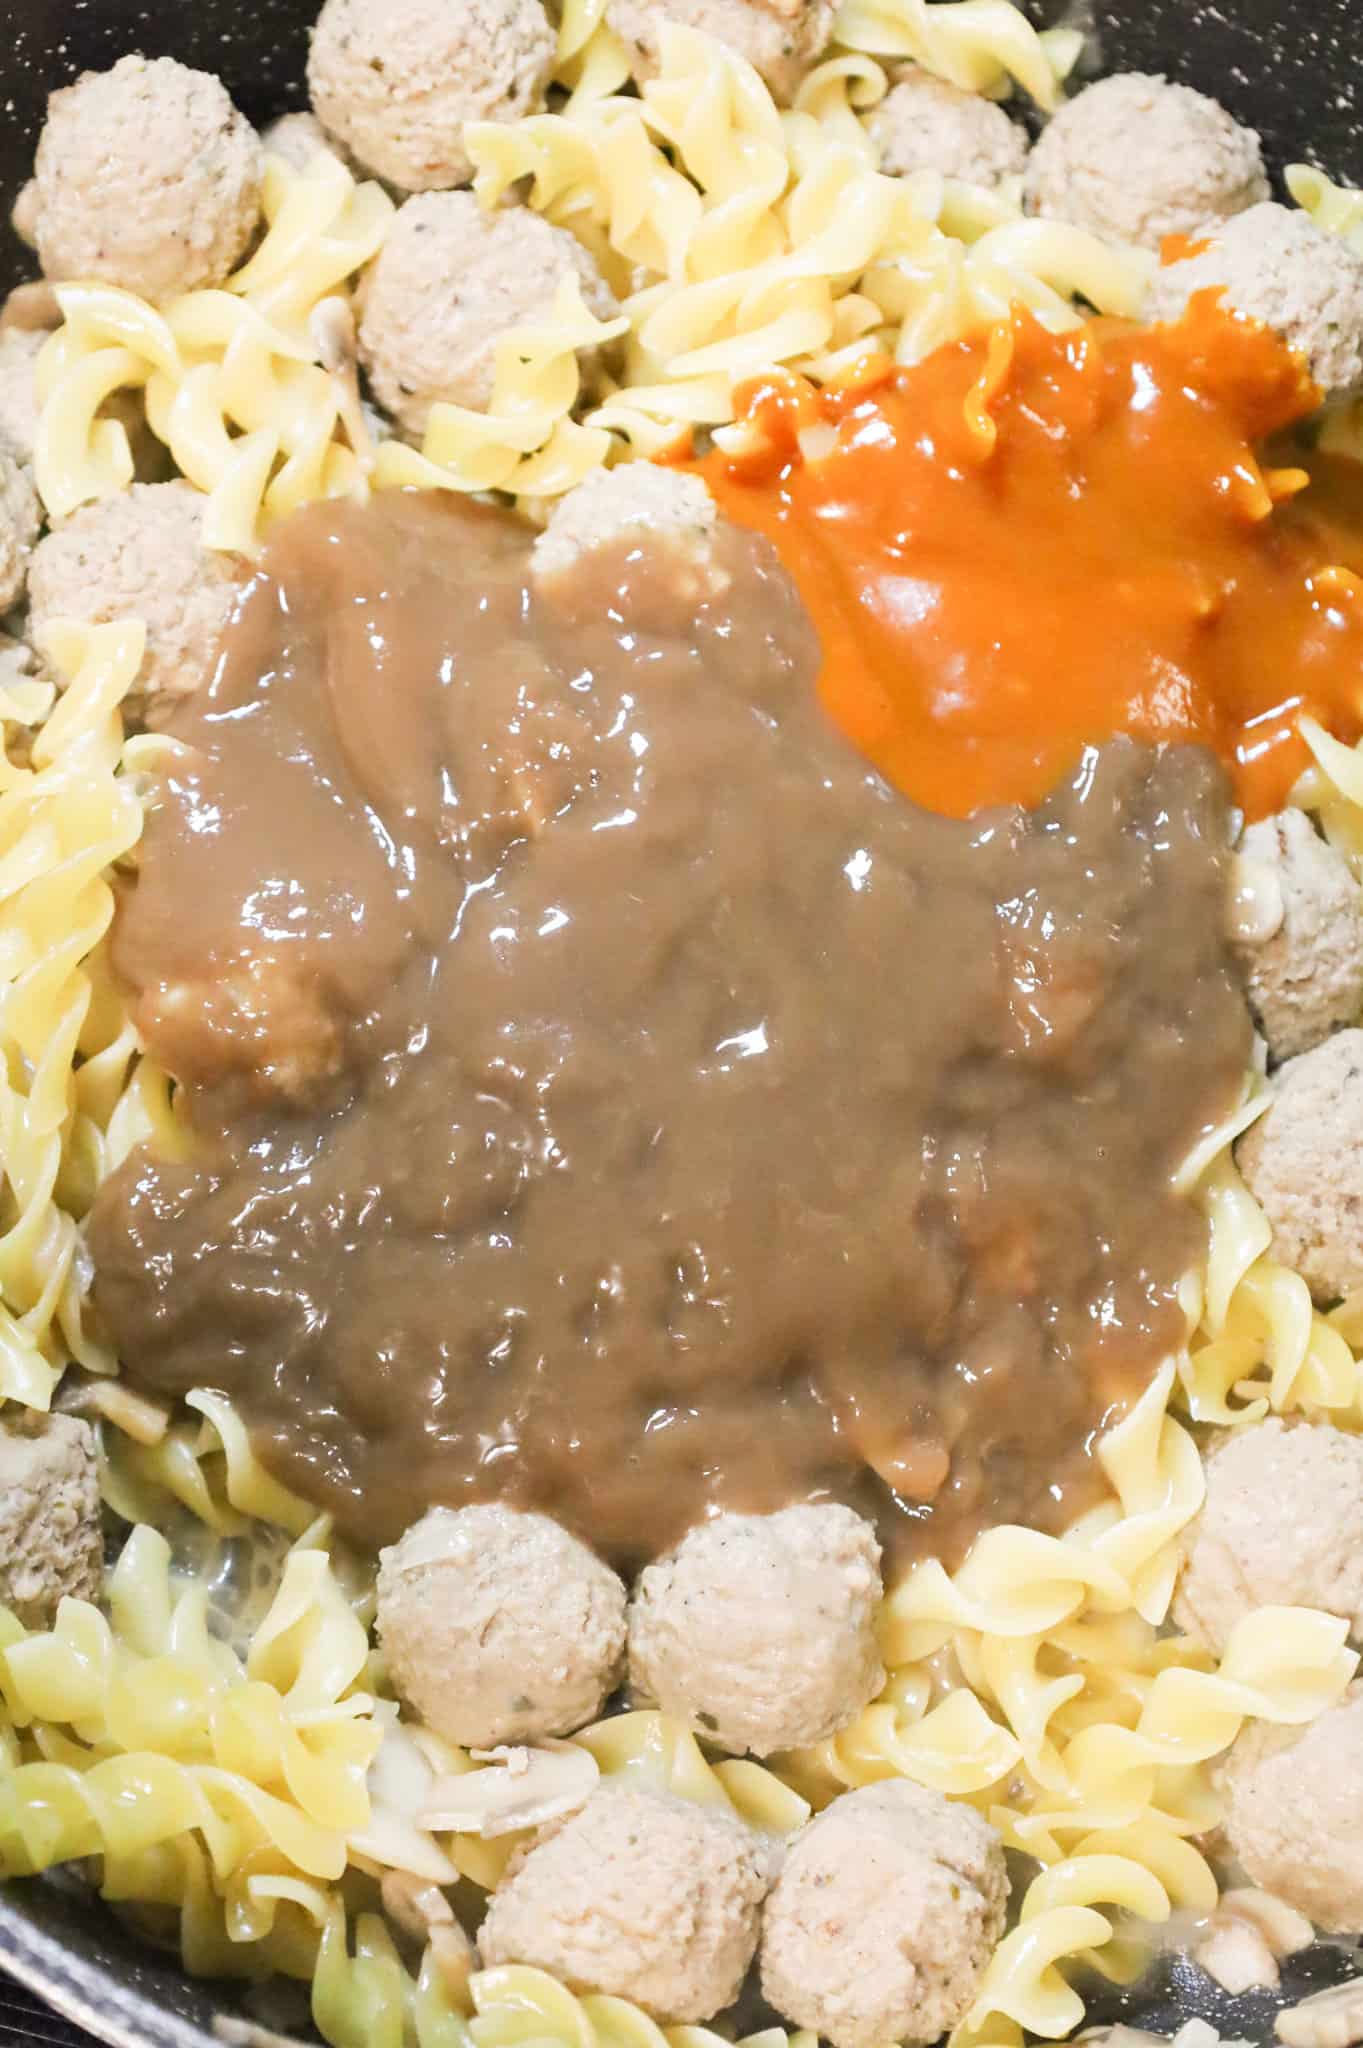 beef gravy and Heinz 57 sauce on top of meatballs and egg noodles in a skillet